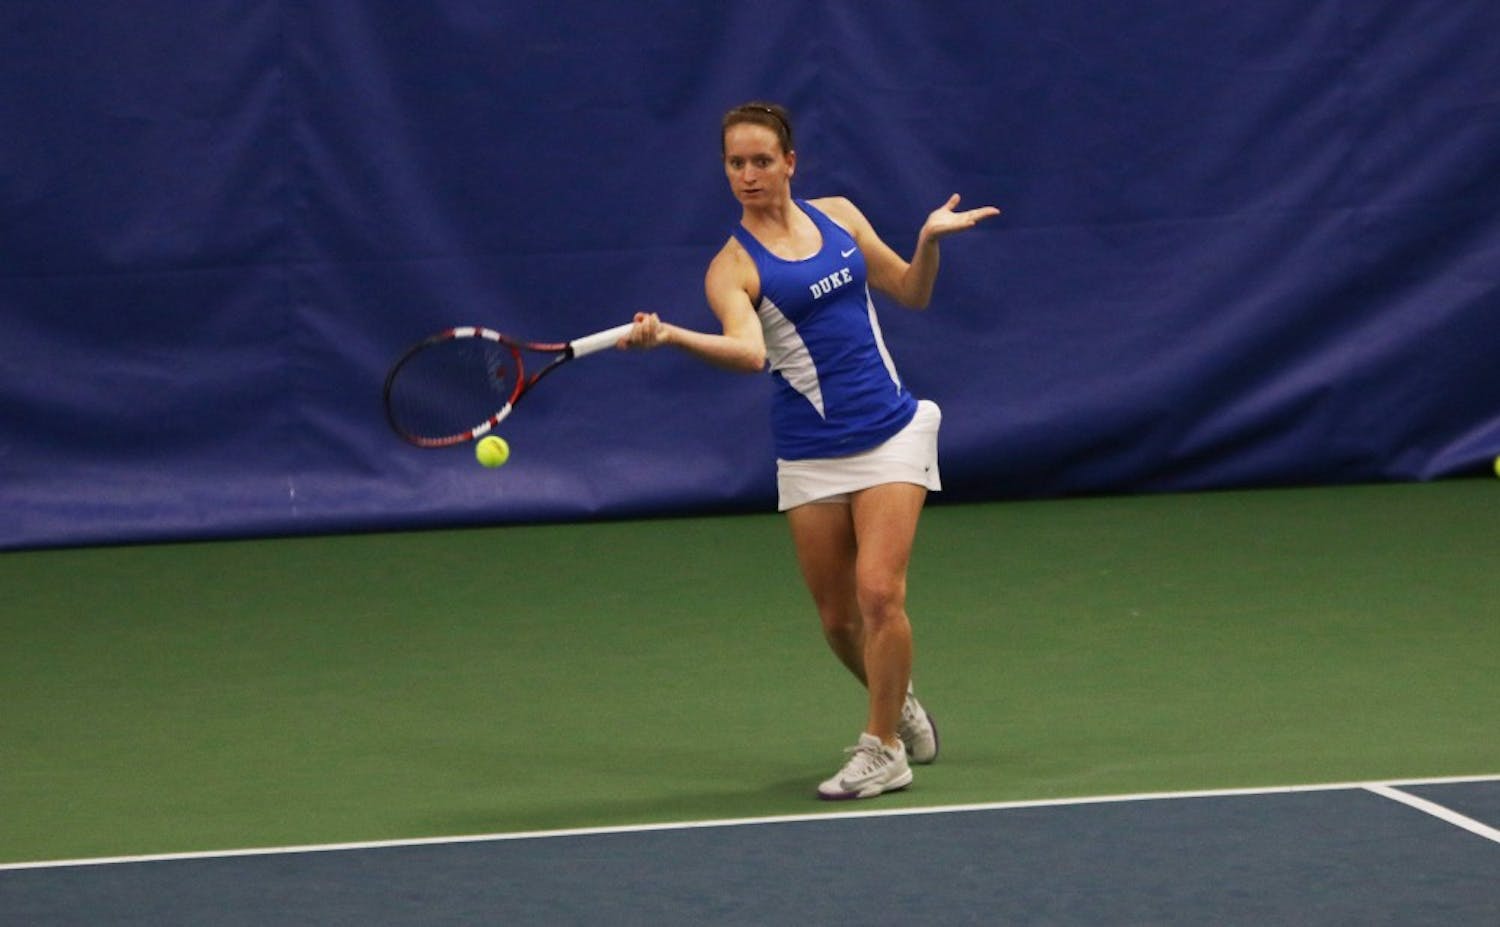 Junior Chalena Scholl notched her second consecutive upset win as the Blue Devils bounced back from a Friday loss to Georgia Tech with a 5-2 road win at Clemson to close the regular season.